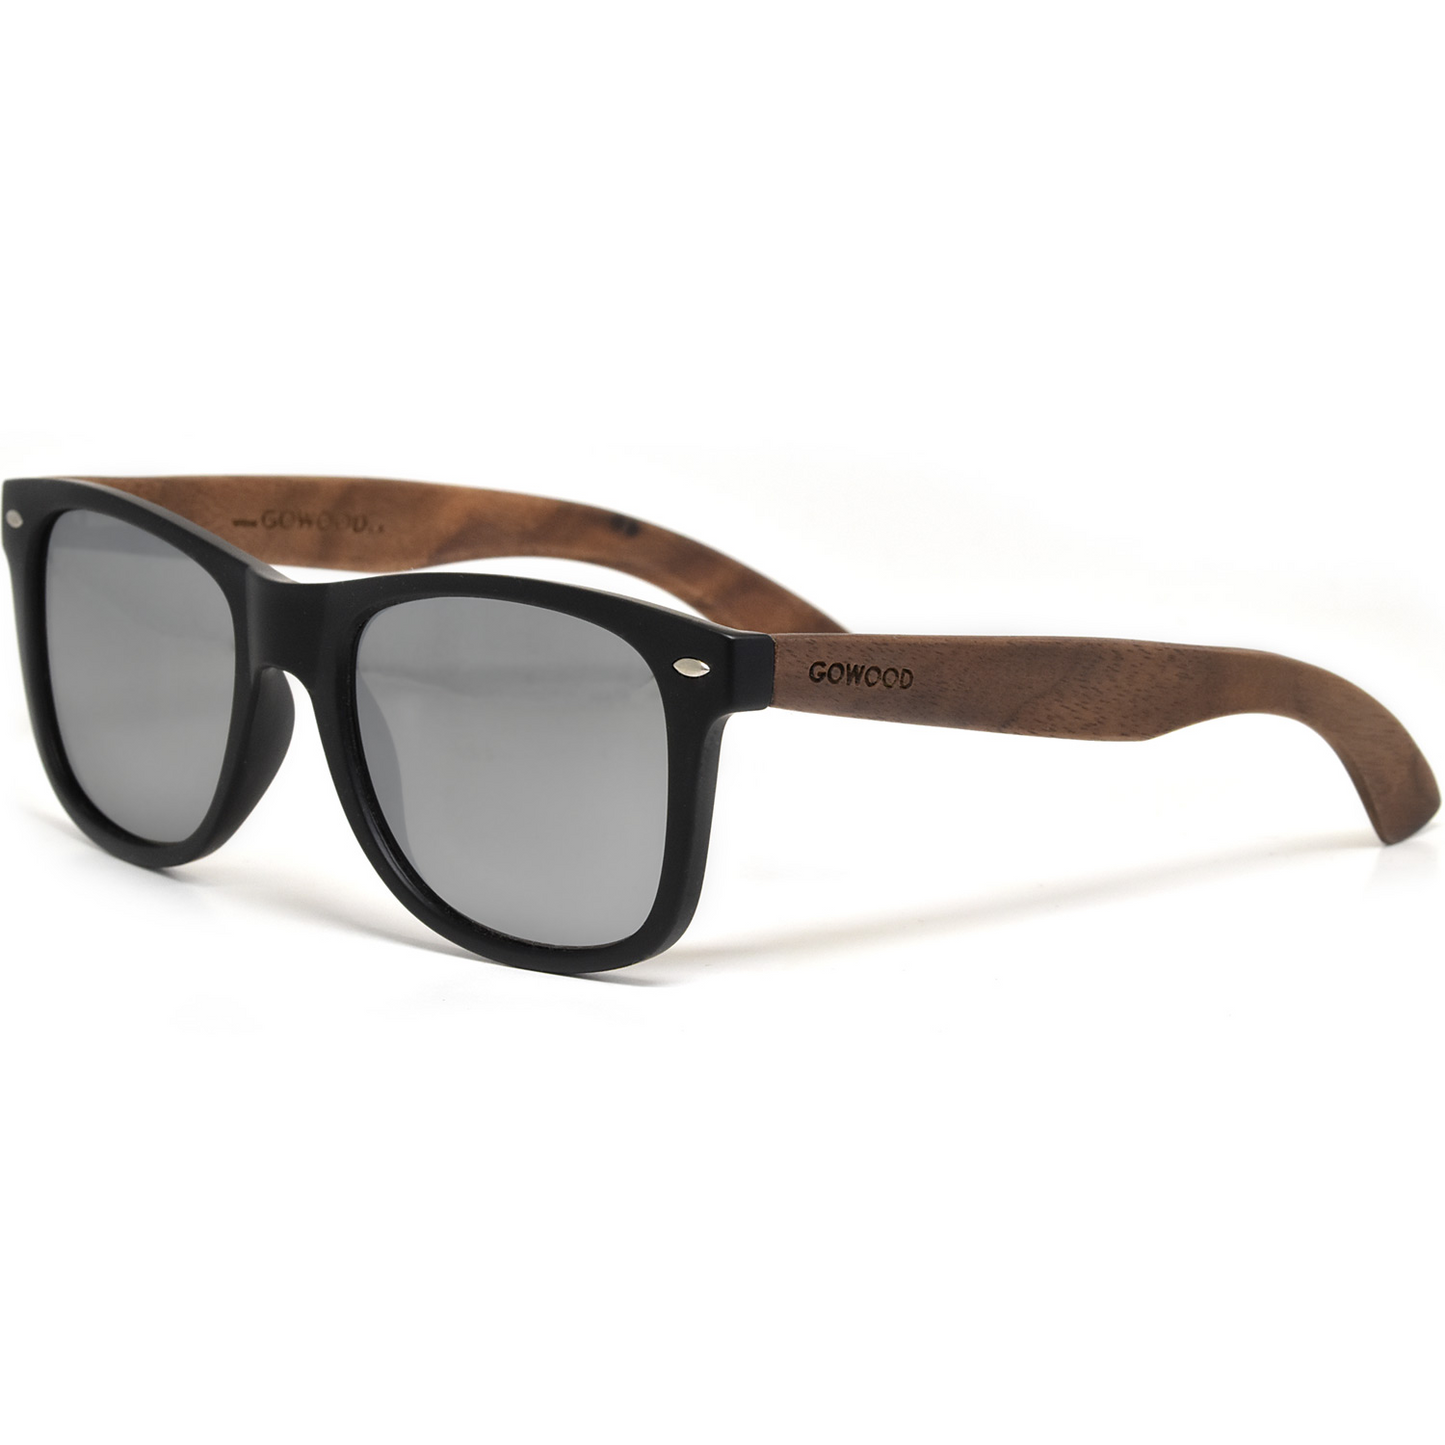 Ebony wood classic style sunglasses with silver mirrored polarized lenses